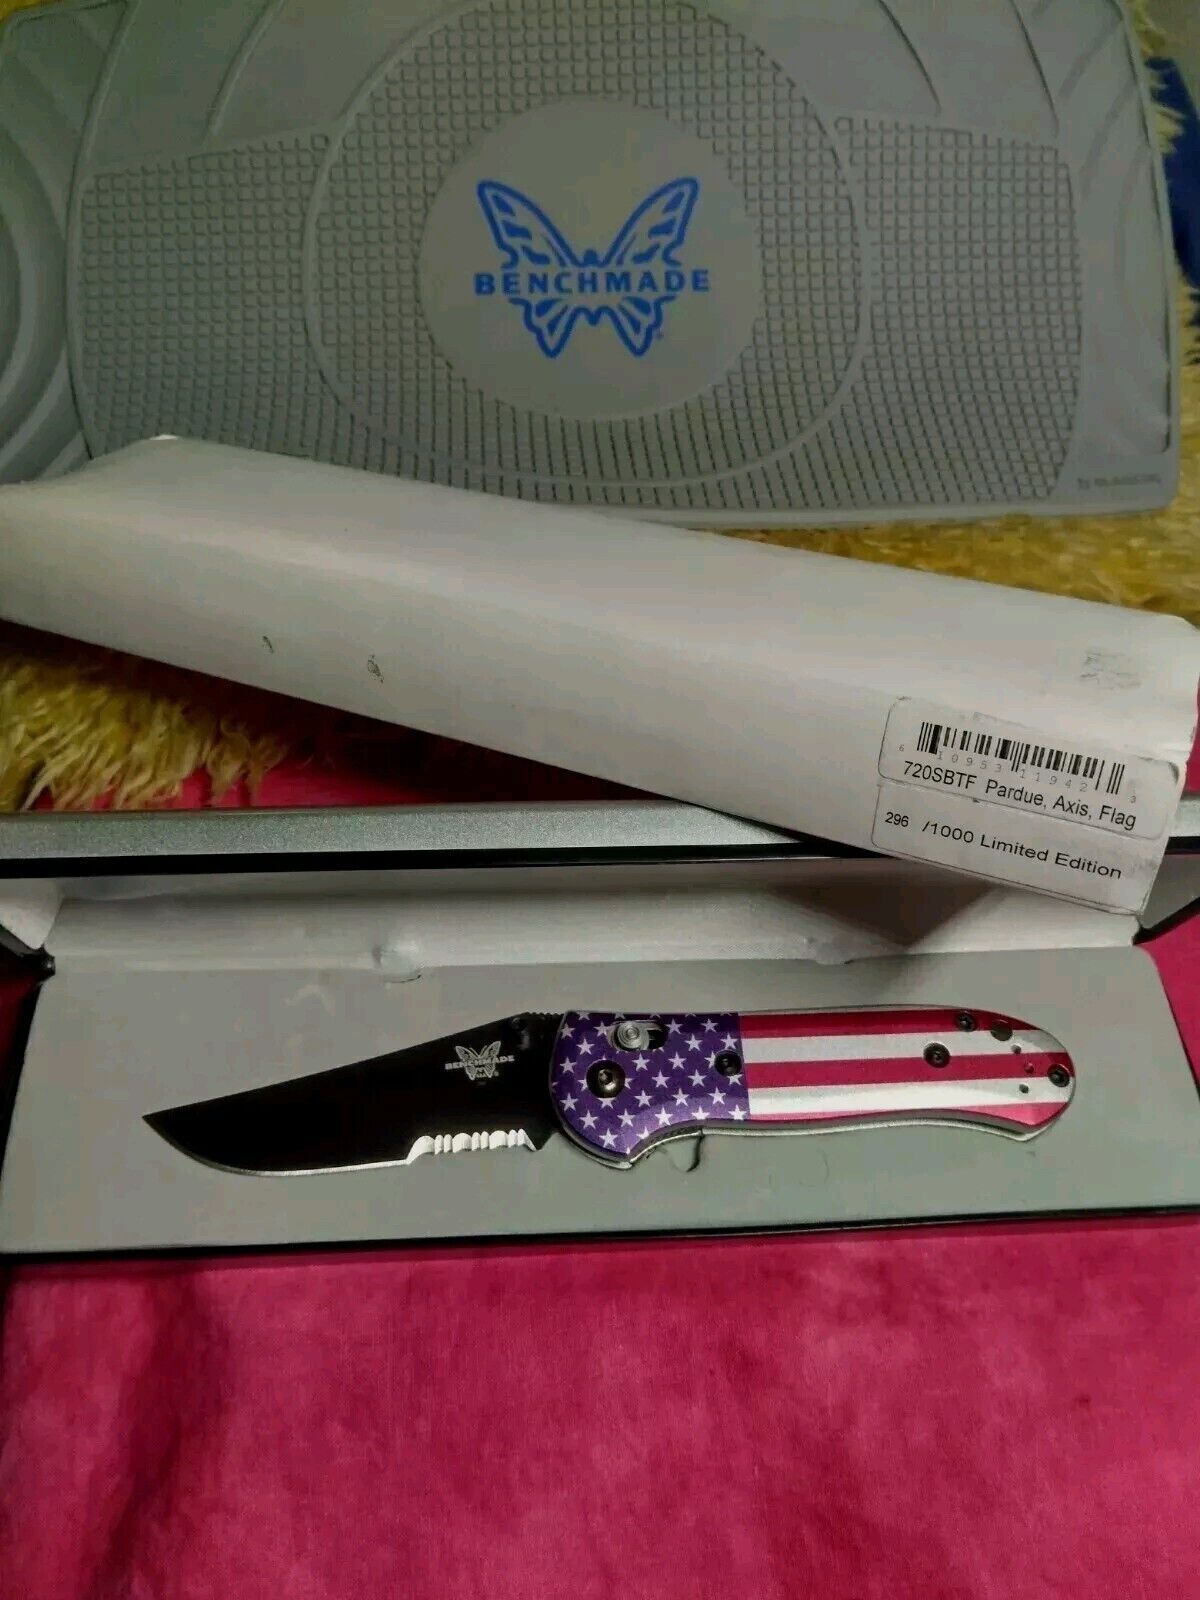 BENCHMADE 🦋   *720SBTF* 🇺🇸FLAG🇺🇸(Alum/154cm.) Brand New   Father's Day 🎁